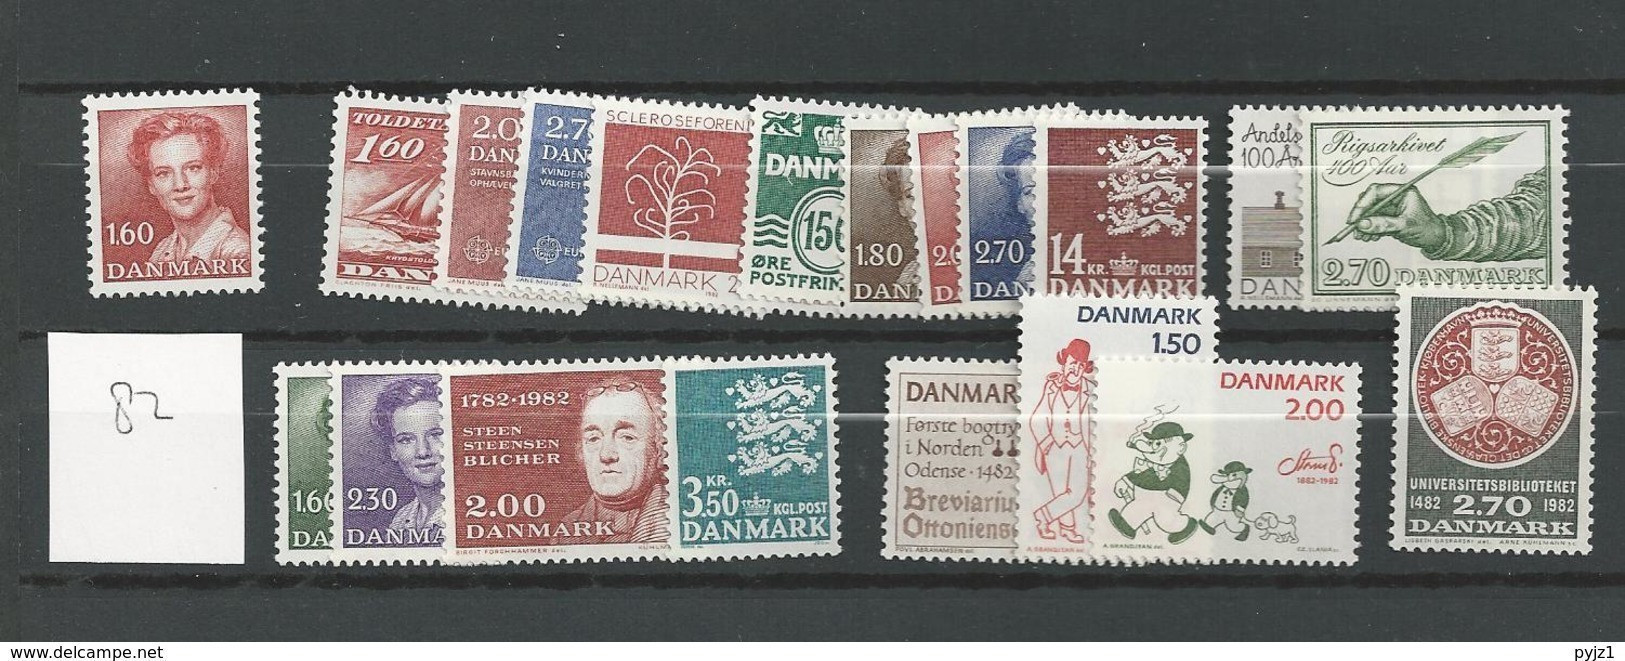 1982 MNH Denmark, Year Complete Postfris** - Full Years